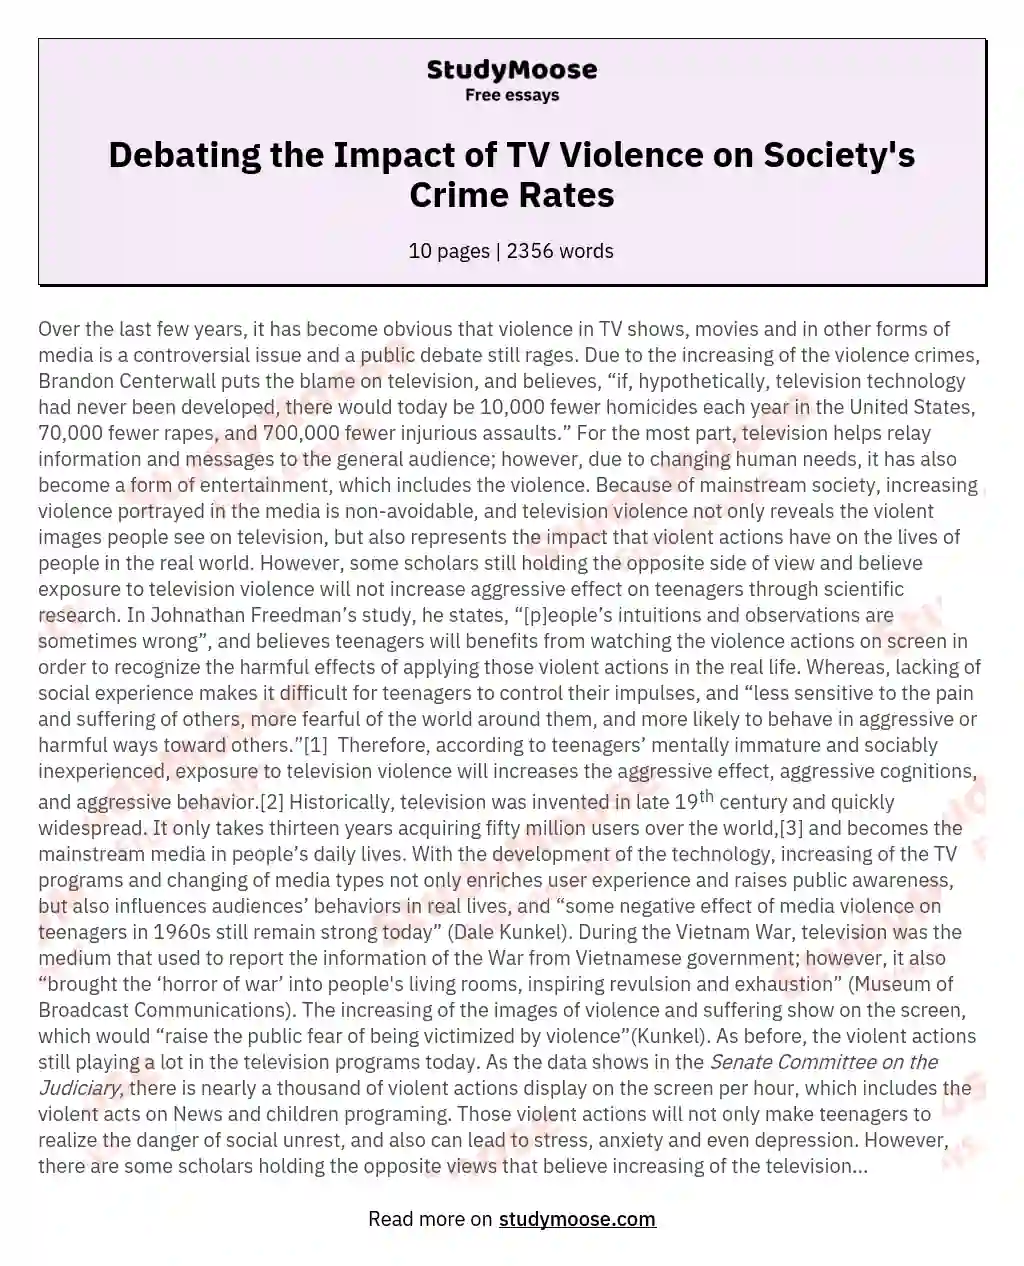 The Controversial Issue of the Positive and Negative Influence and Effects of Violence in TV Shows on Crime in Society